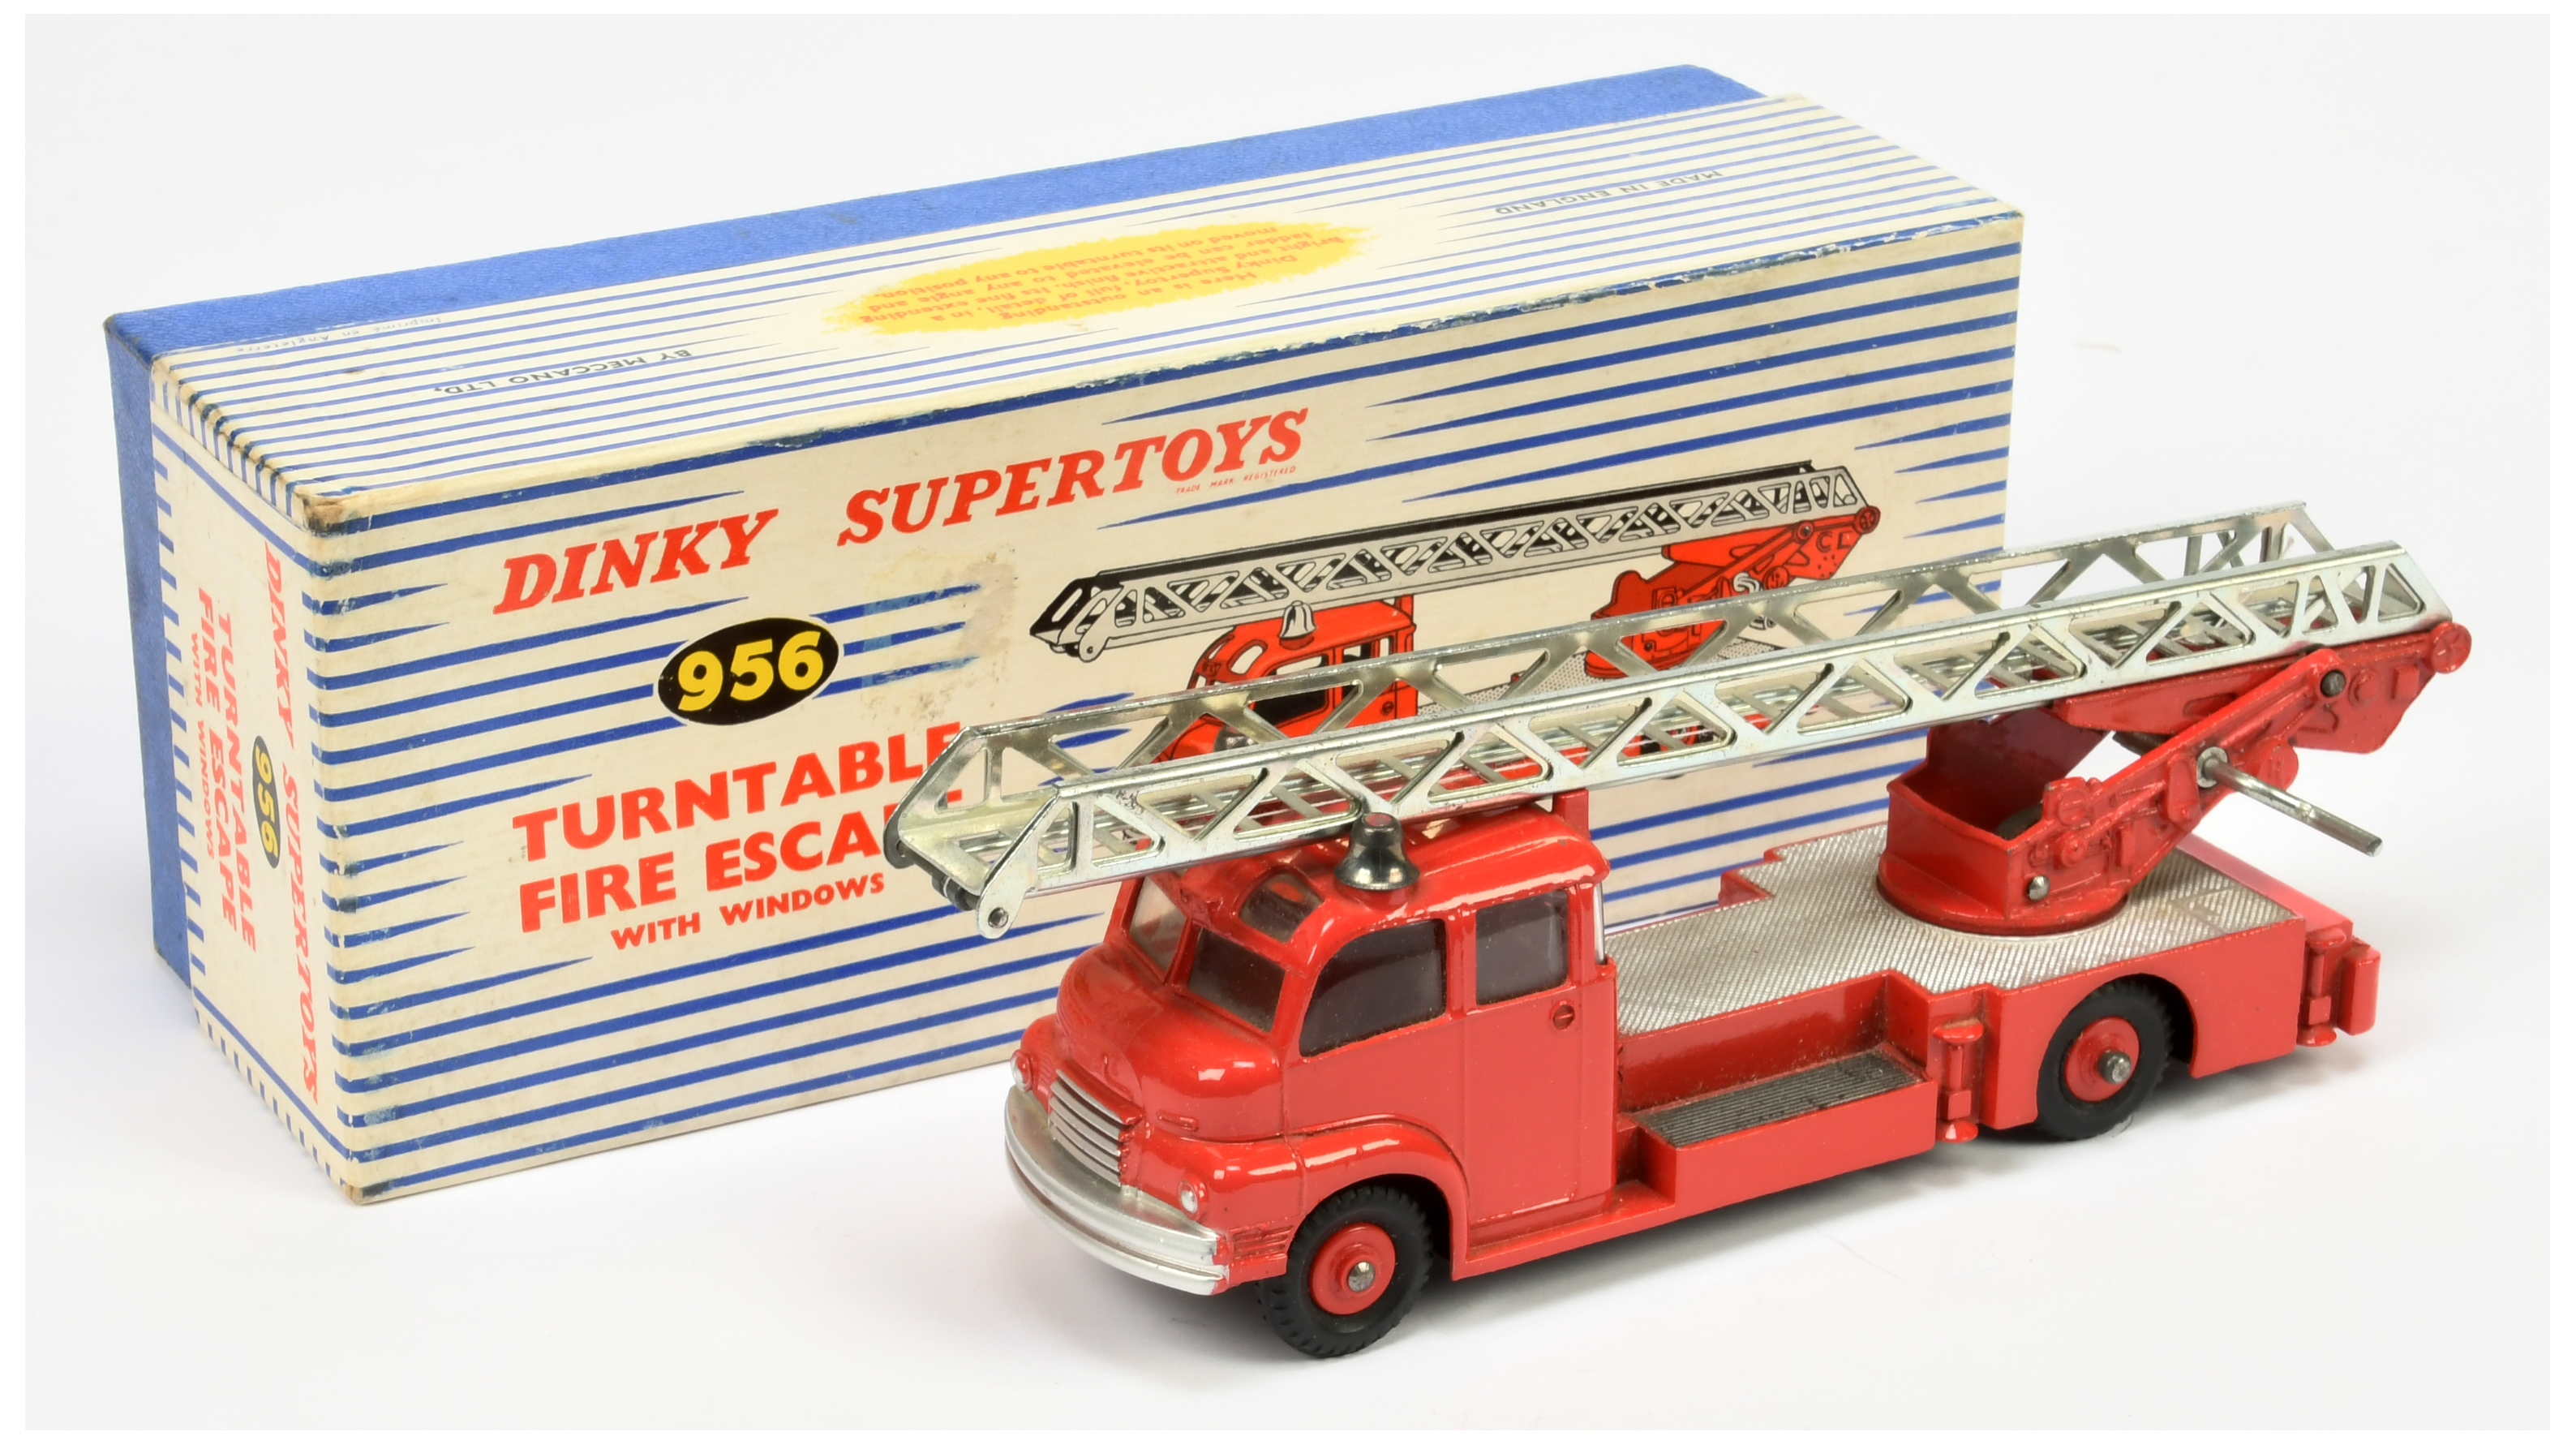 Dinky Toys 956 Turntable Fire Engine - Red including plastic hubs, silver trim and platform, chro... - Image 3 of 4